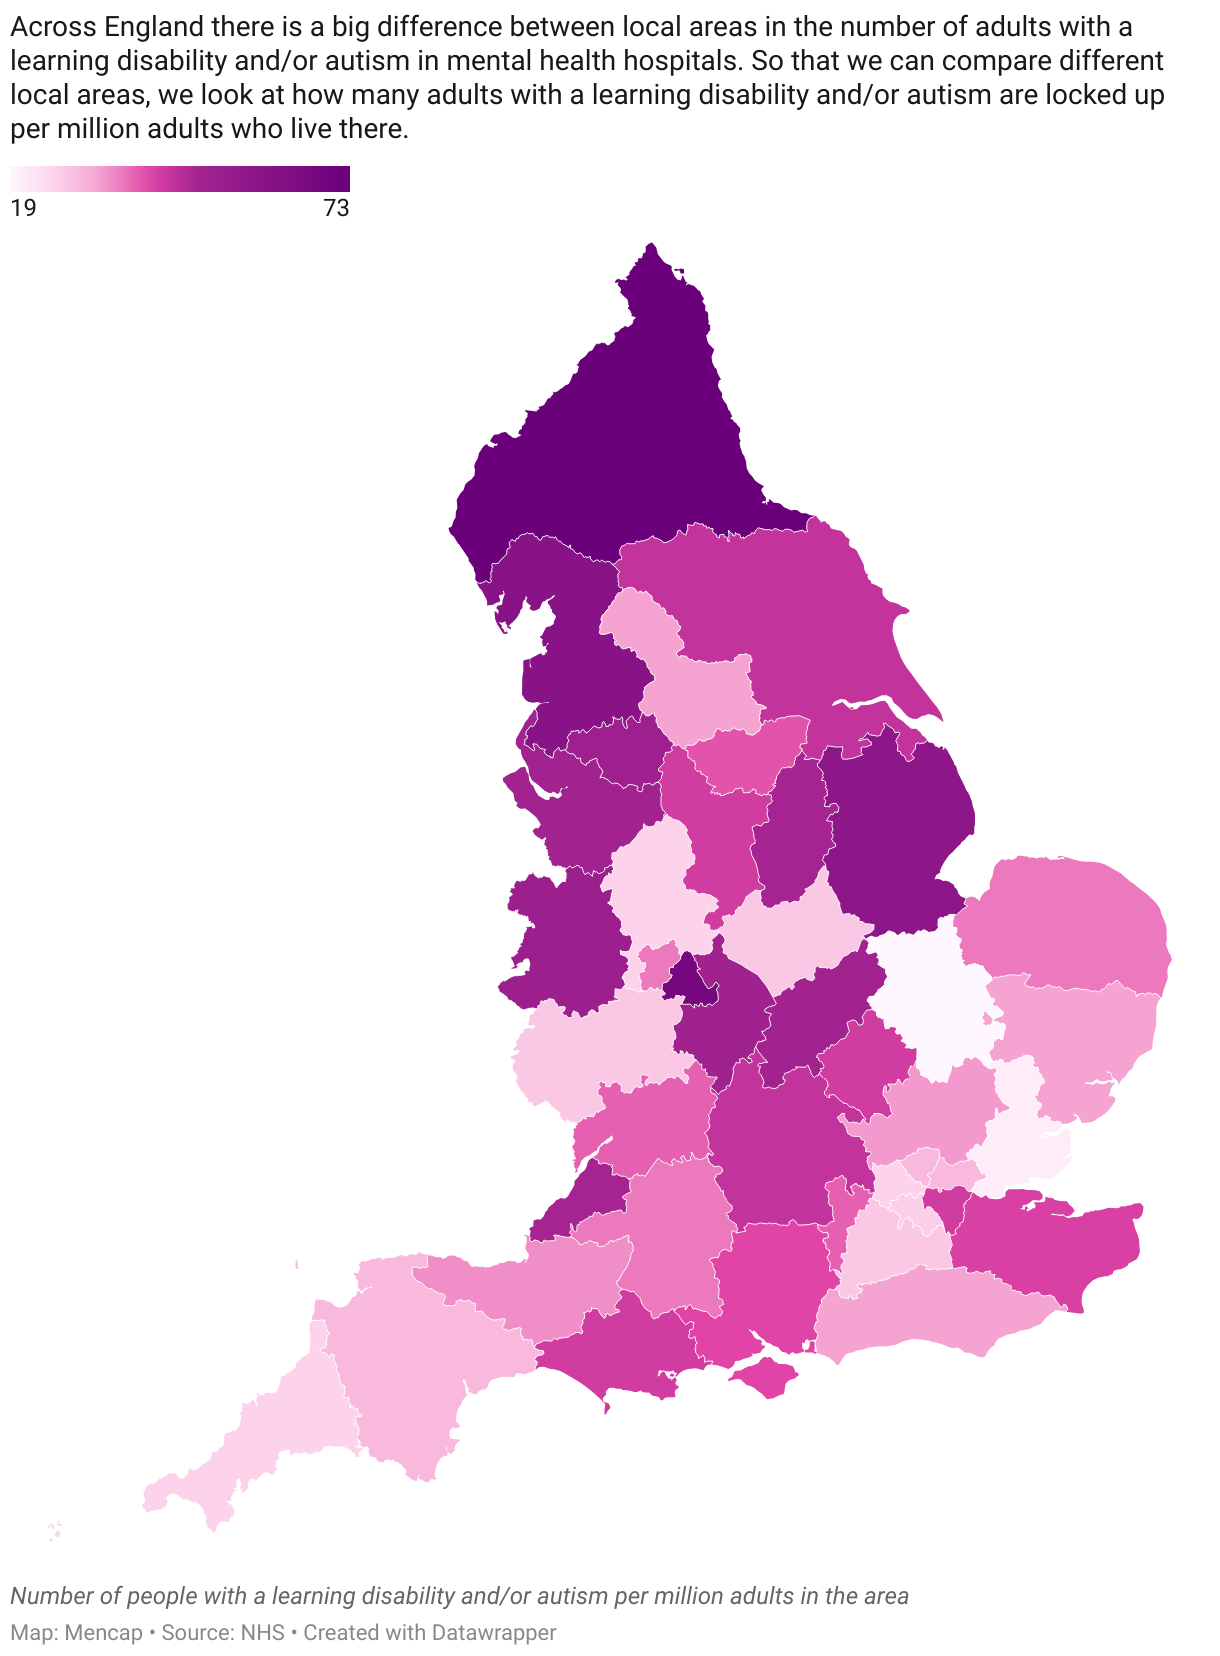 A map showing the regional differences in how many adults with a learning disability of autism locked up in mental health hospitals.